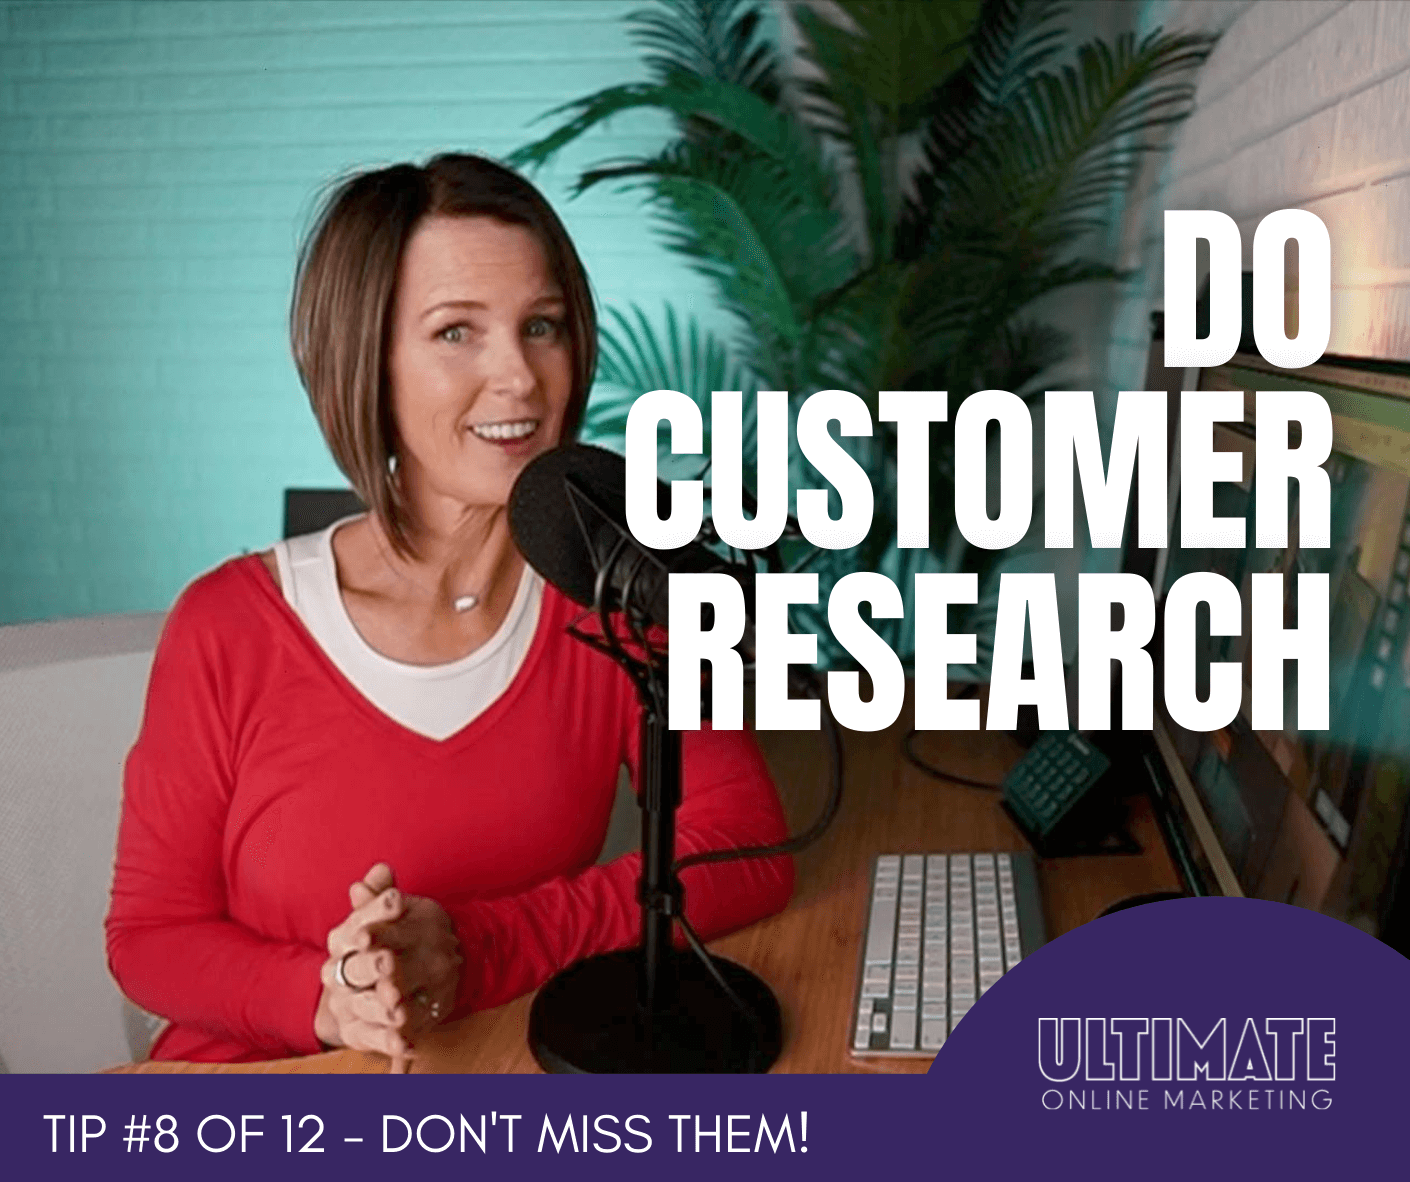 Do customer research online